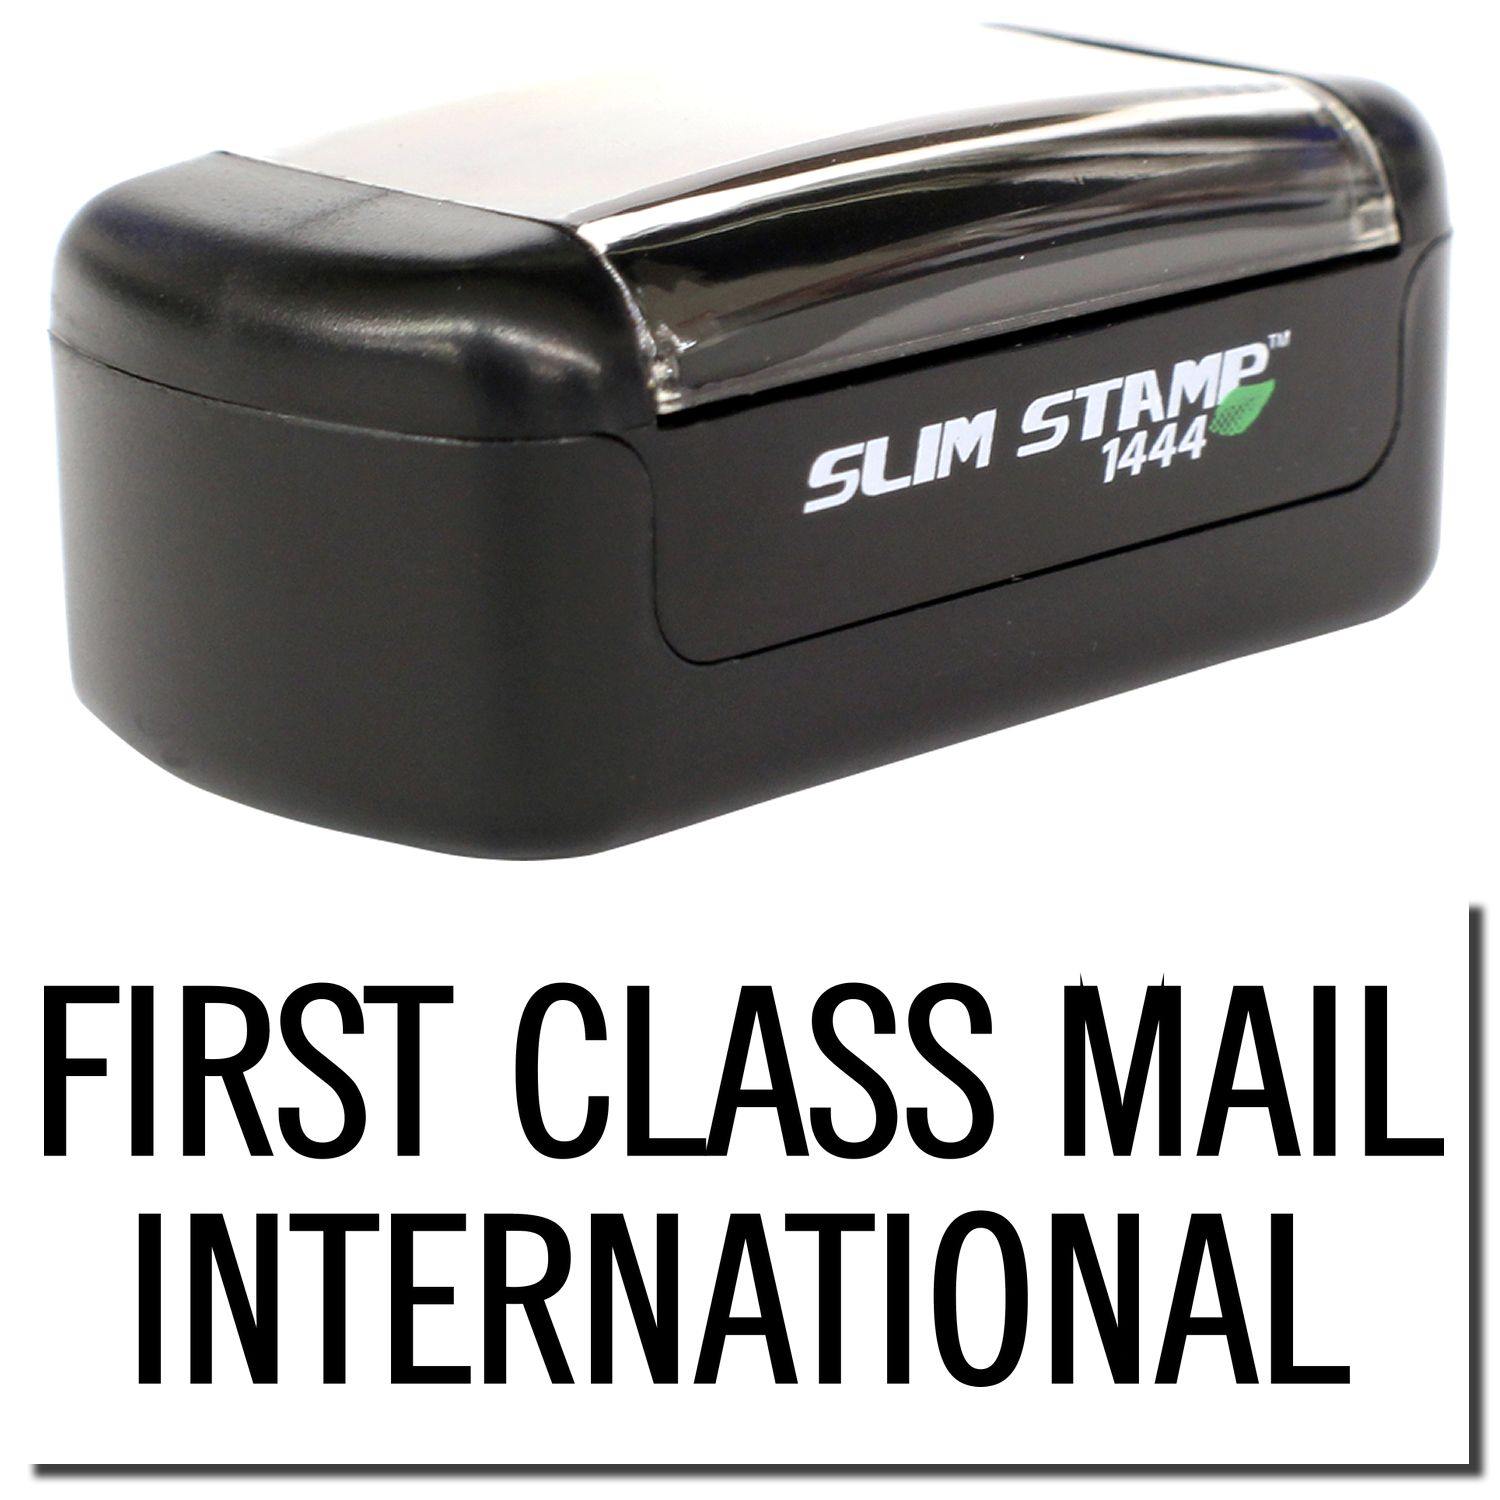 A stock office pre-inked stamp with a stamped image showing how the text "FIRST CLASS MAIL INTERNATIONAL" is displayed after stamping.